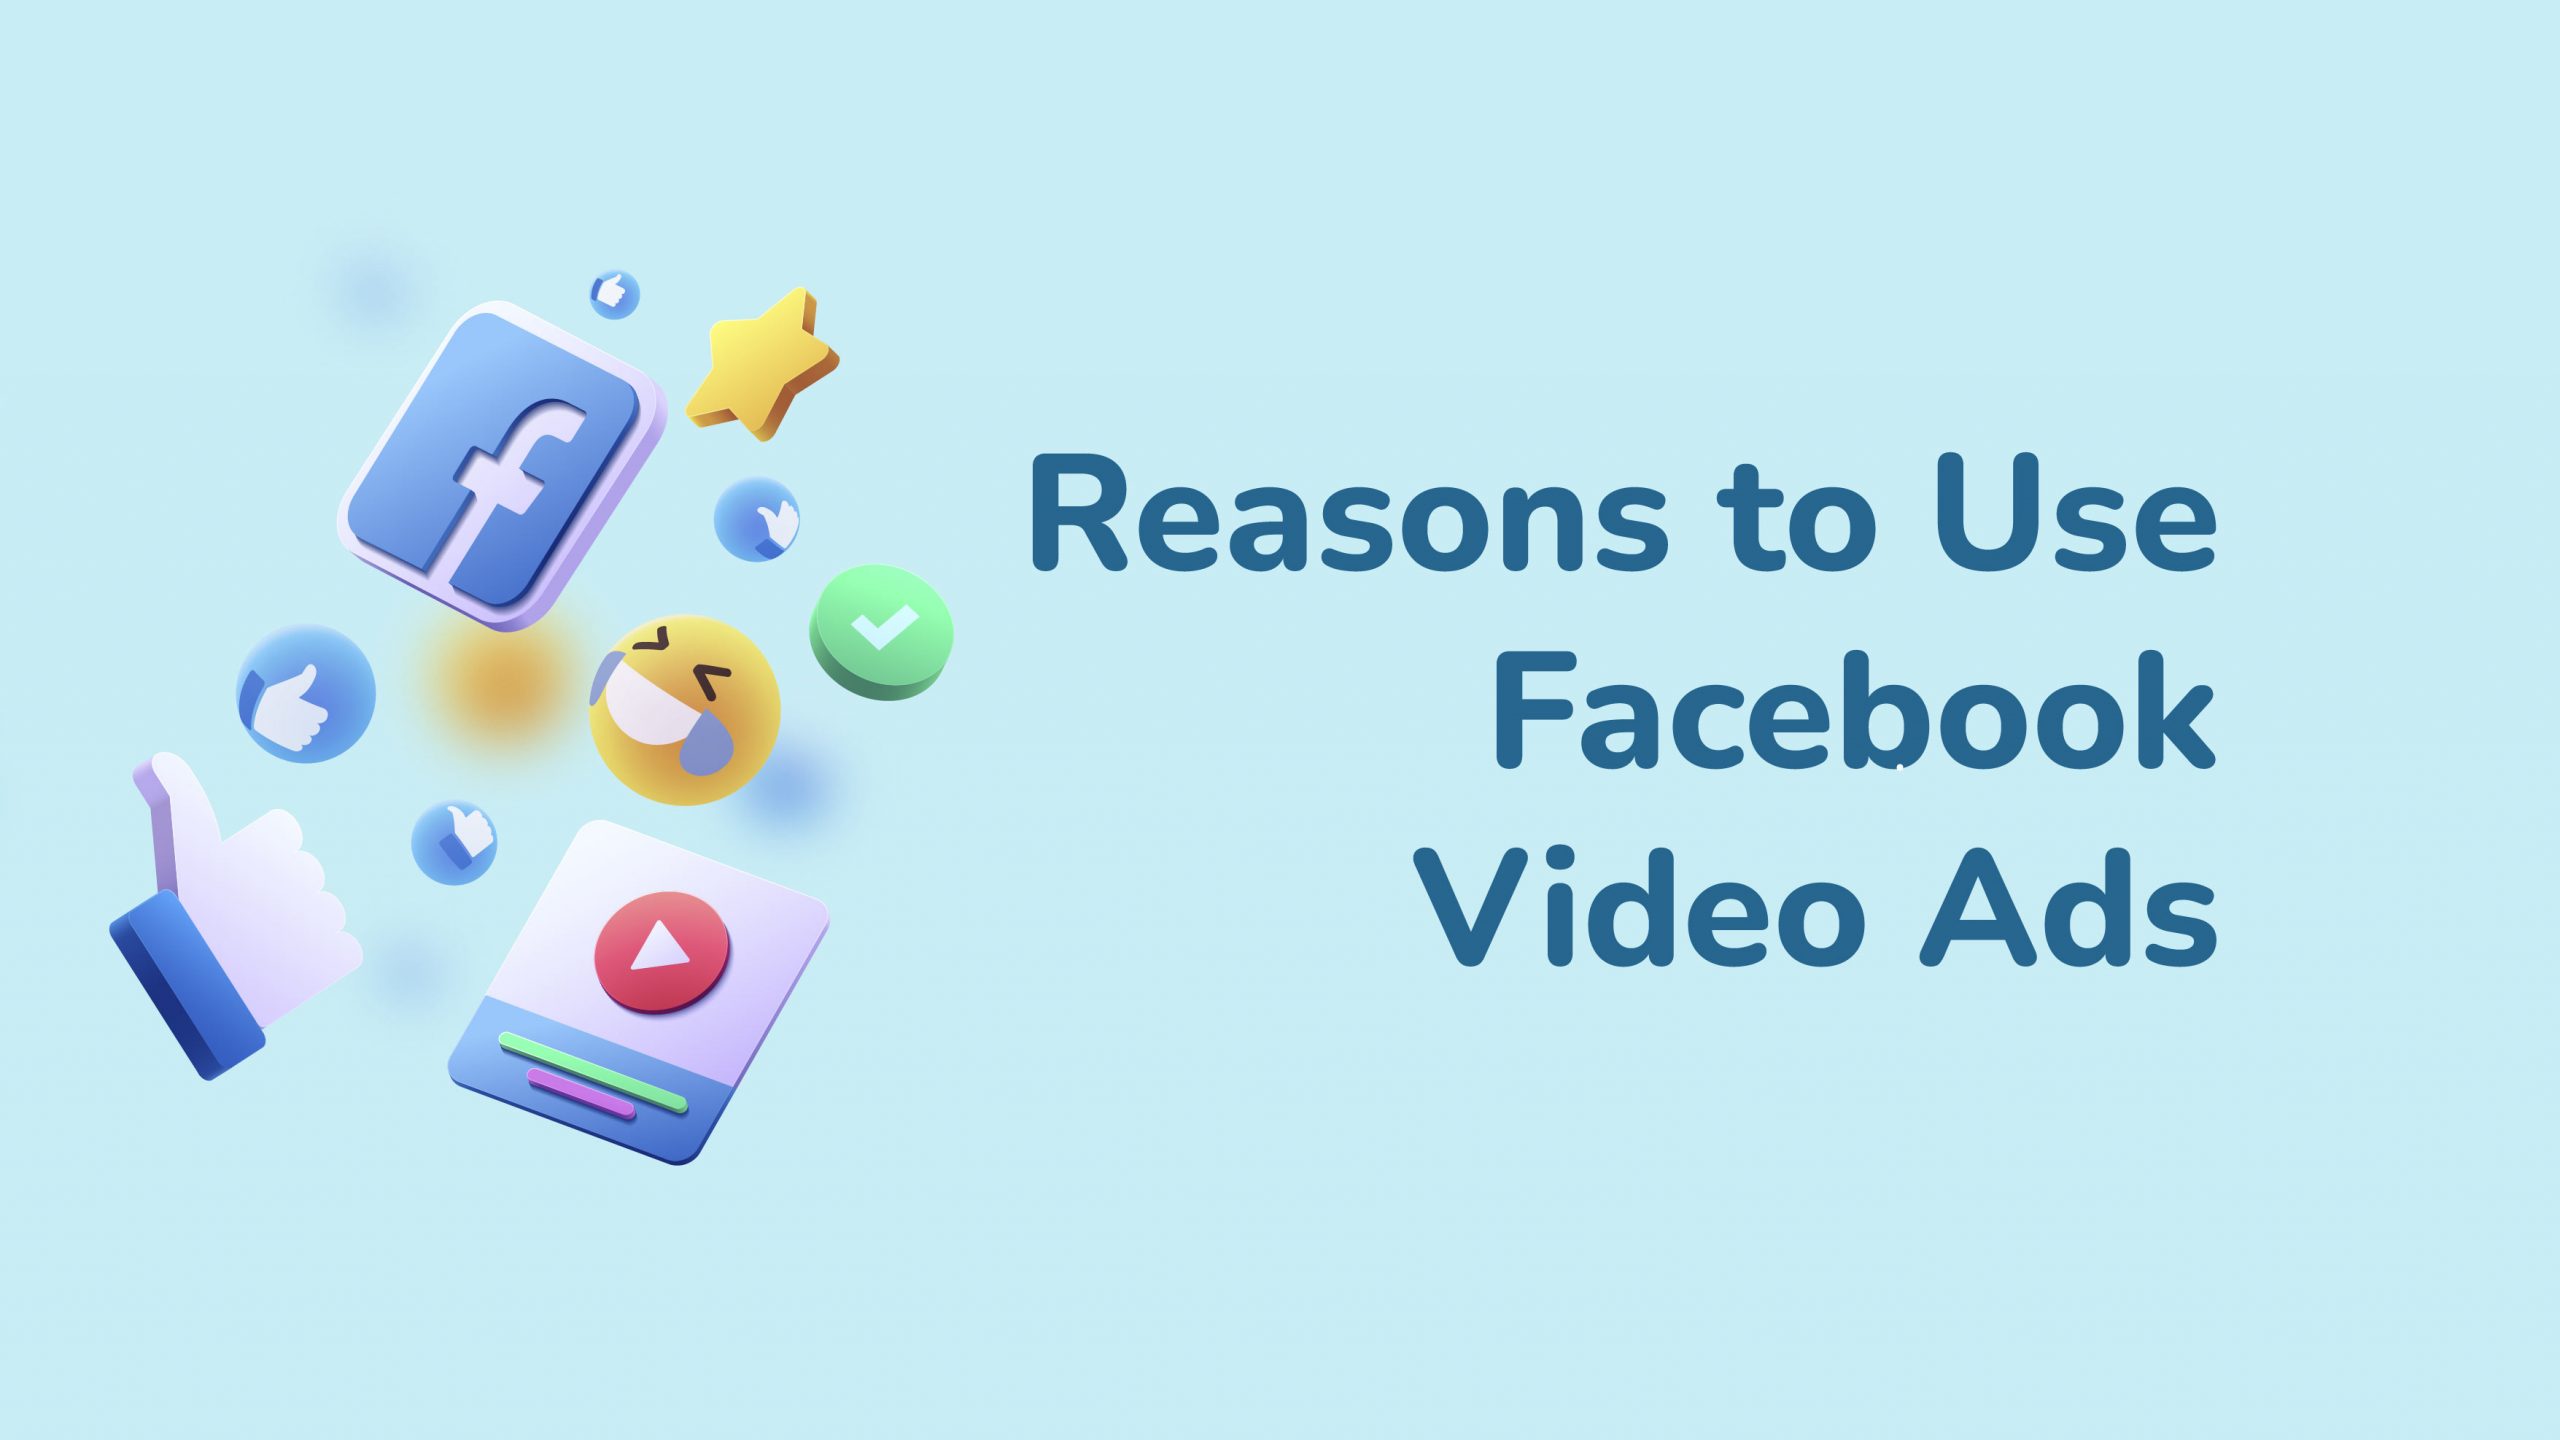 Reasons to Use Facebook Video Ads